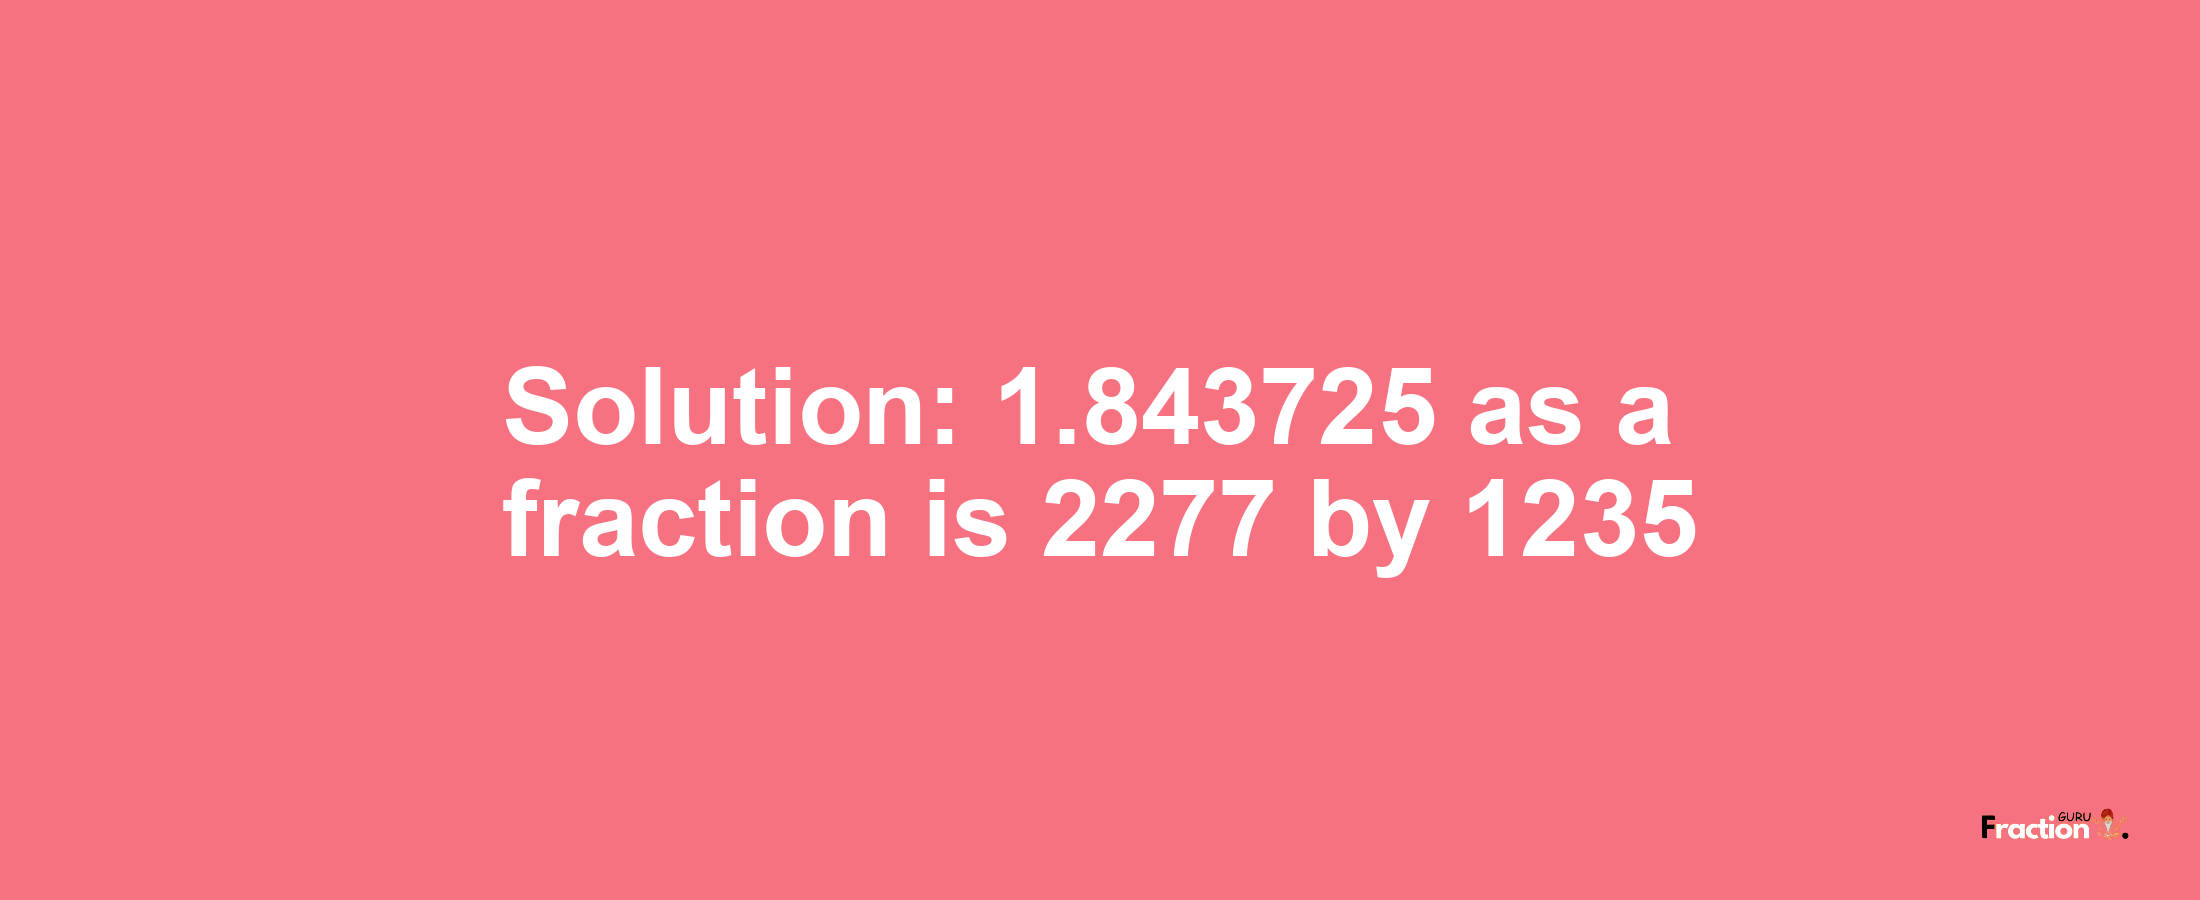 Solution:1.843725 as a fraction is 2277/1235